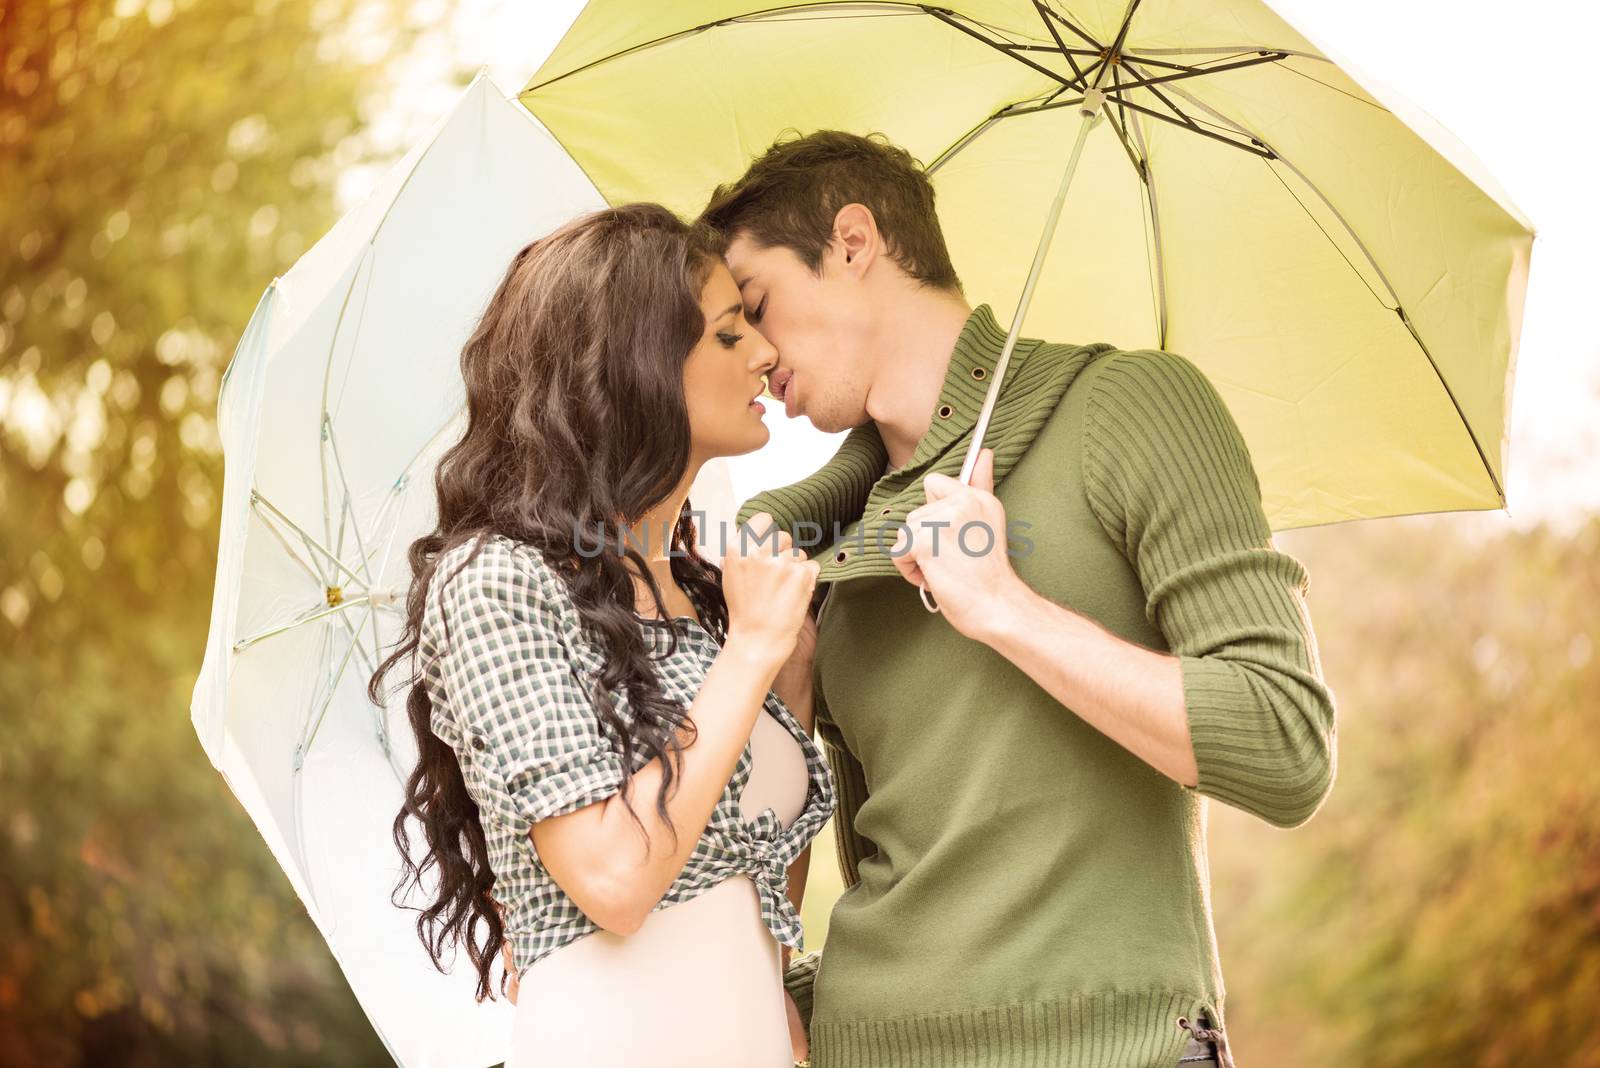 Young girl  and a boy standing embracing under umbrellas and they kiss. In the background is greenery.